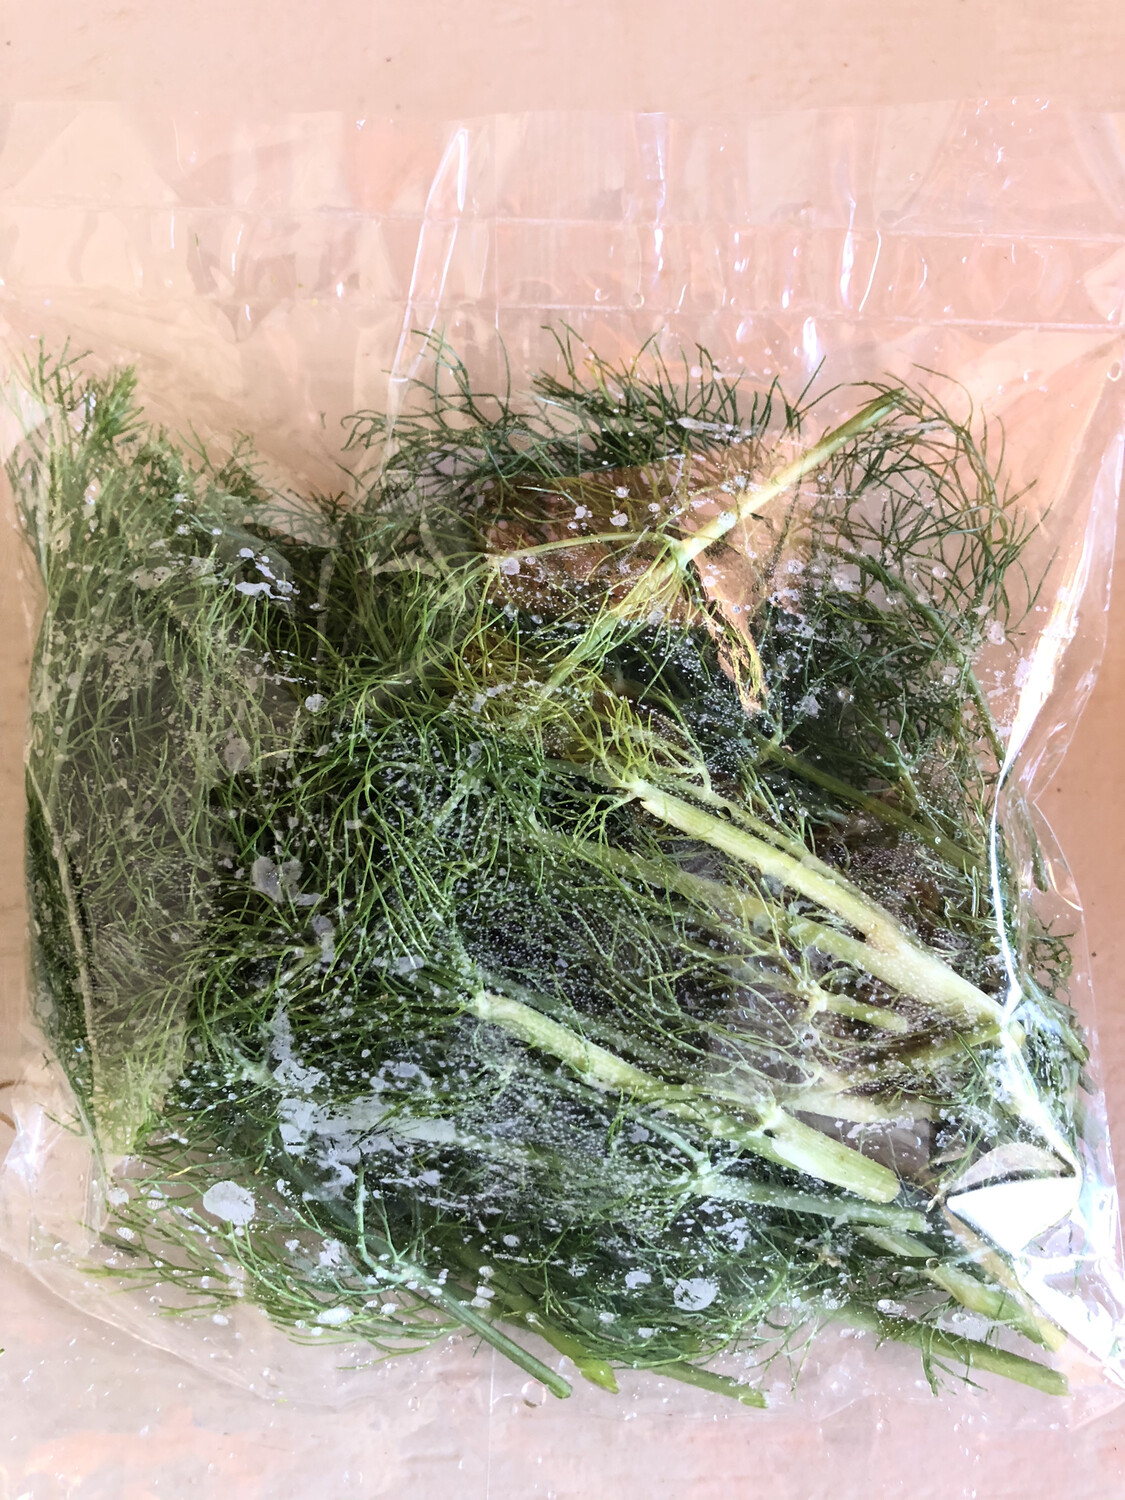 Fennel leaves